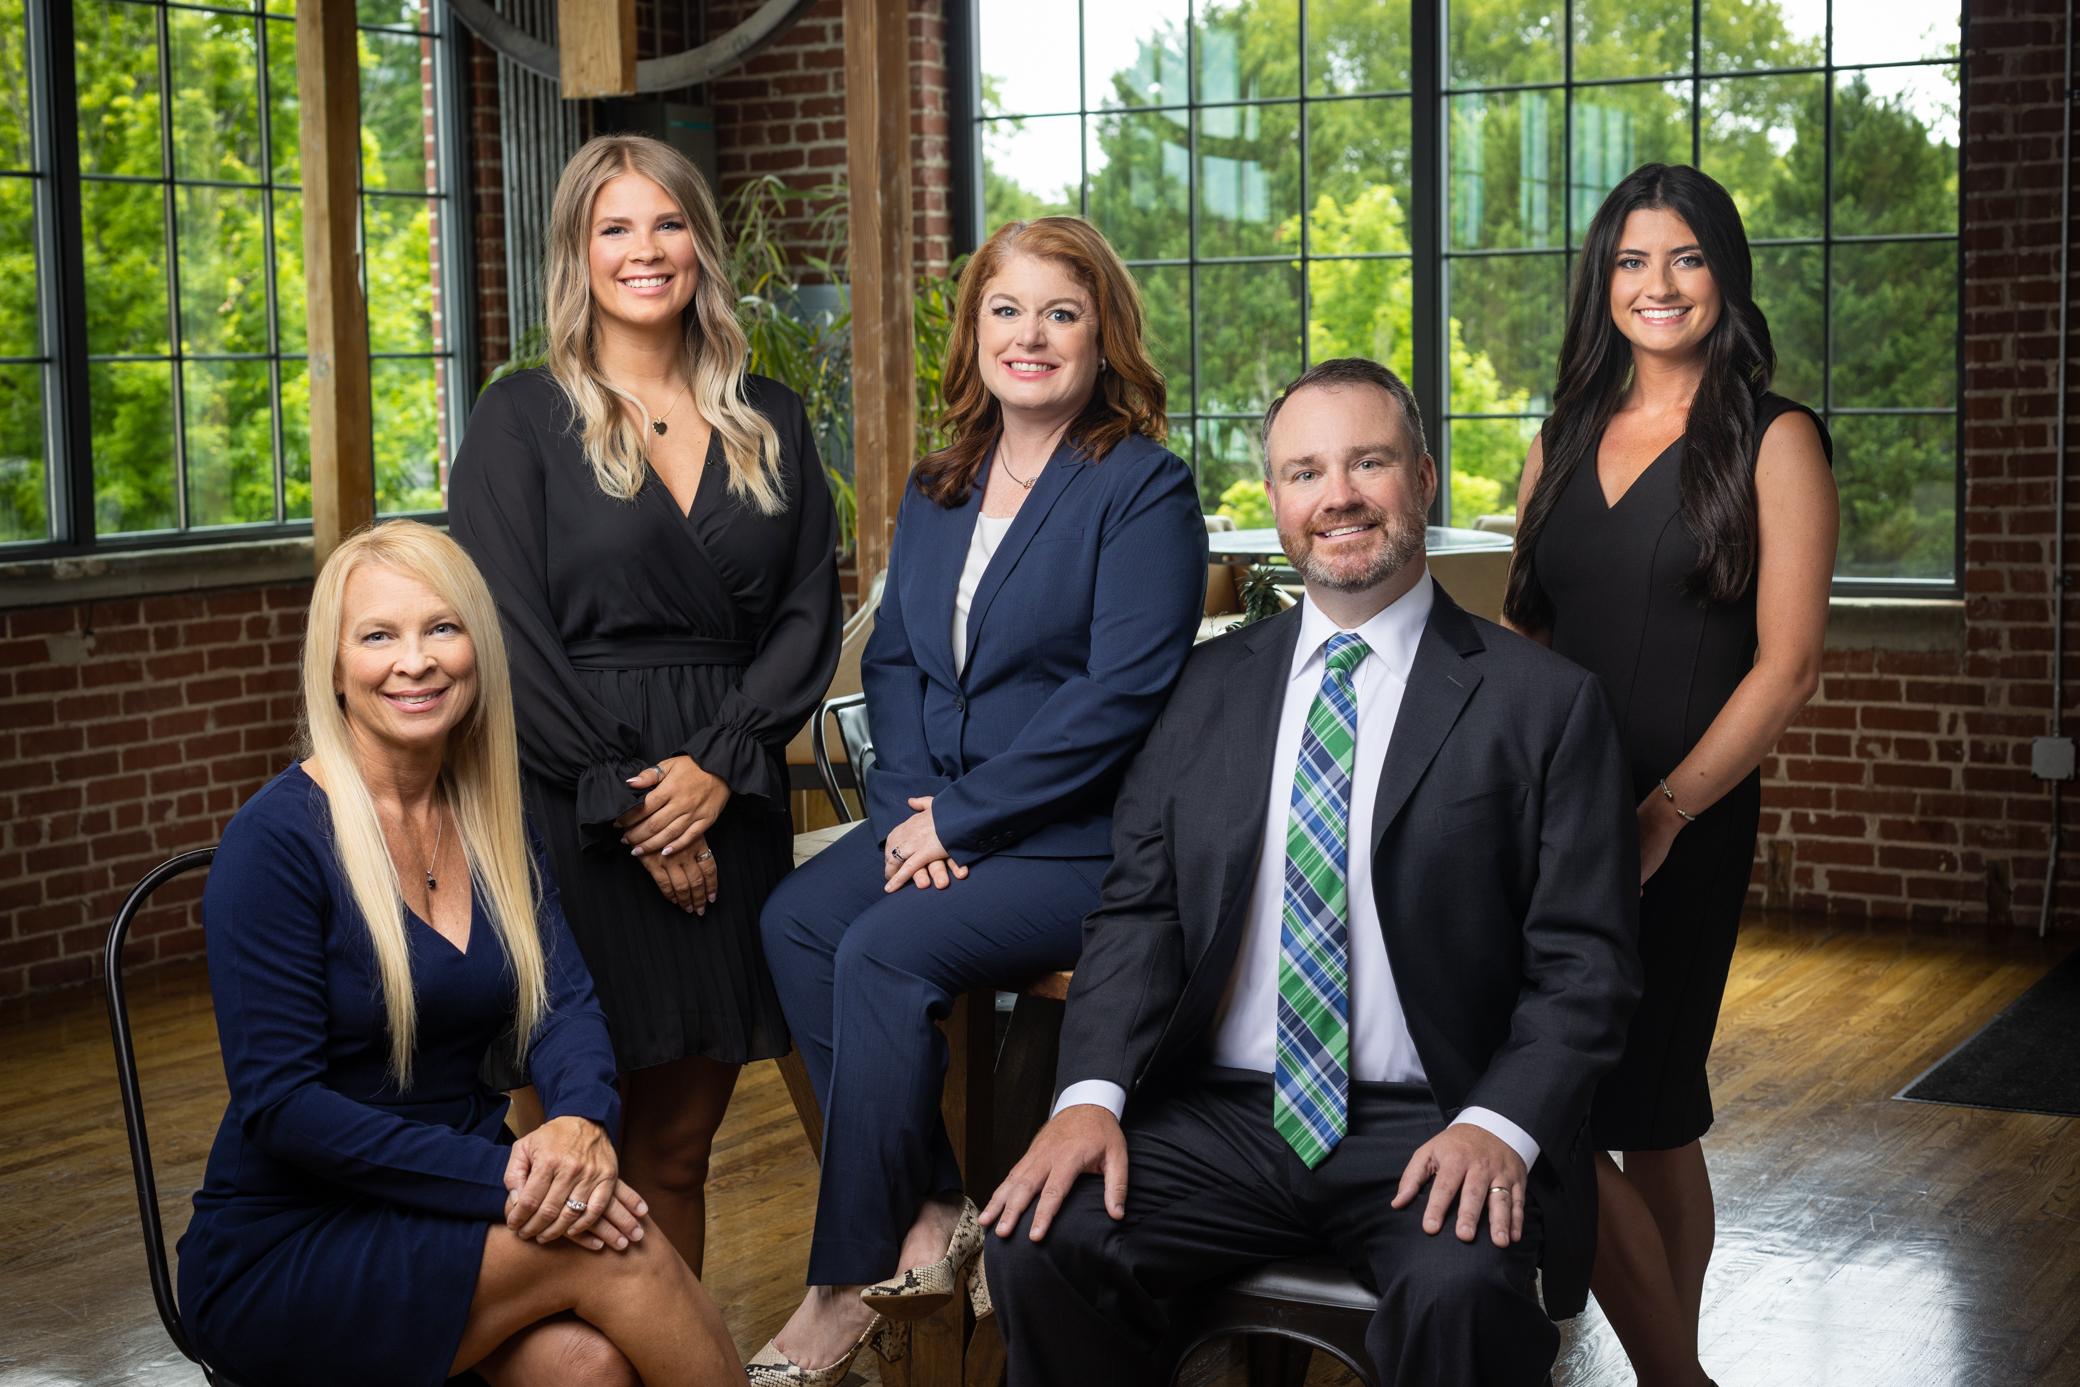 The Gillis Law Firm company photo